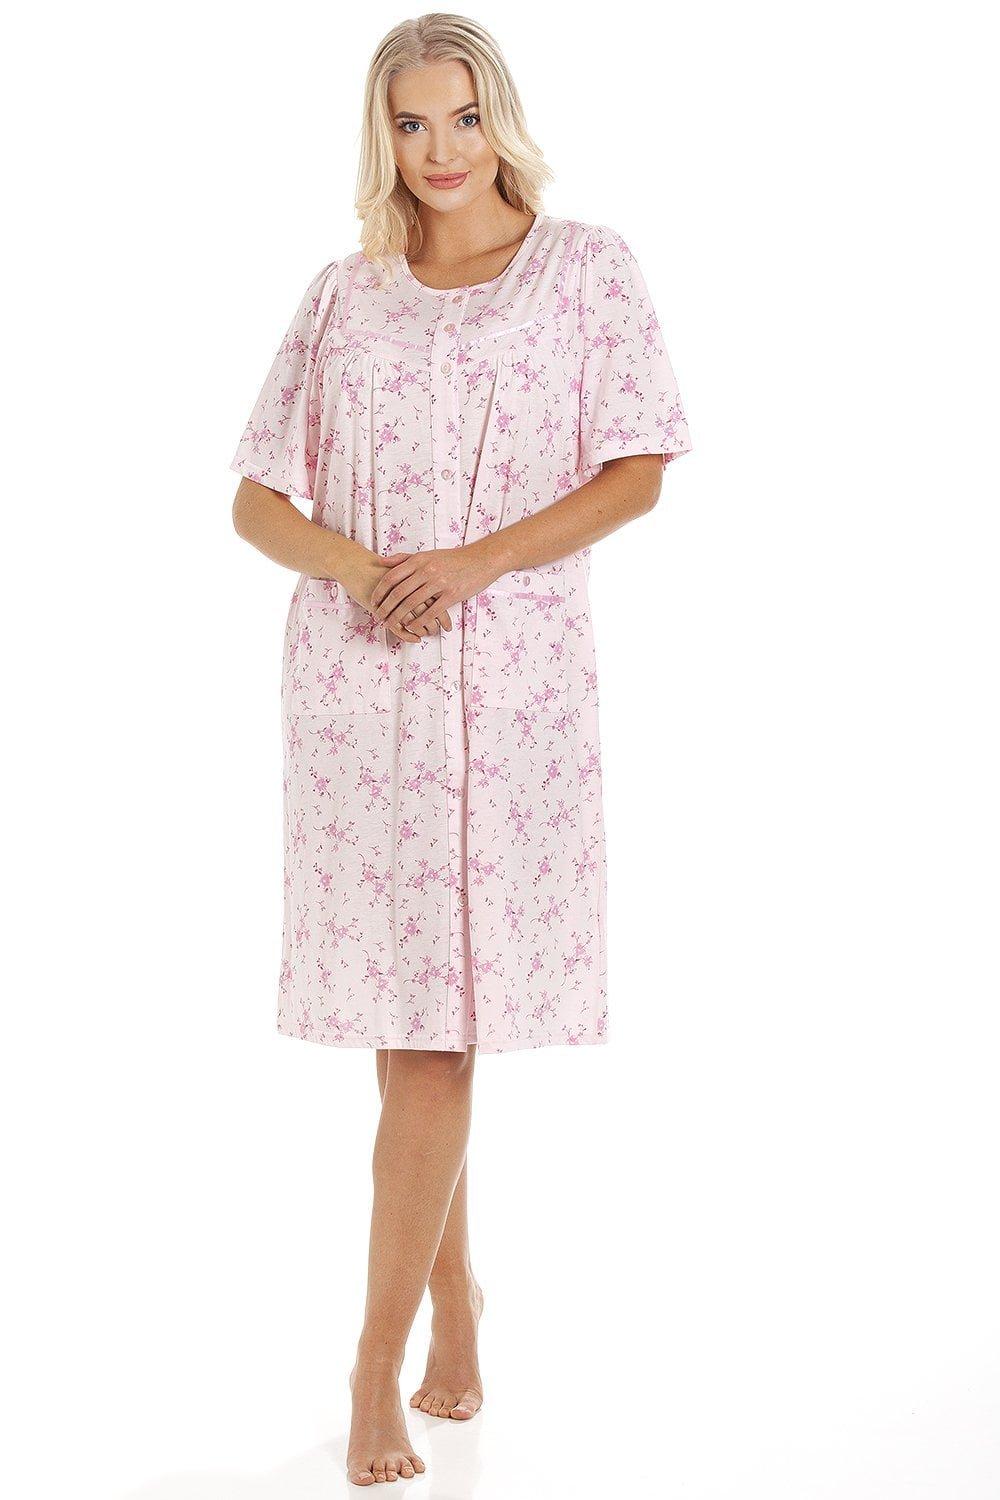 Short Sleeve Button Up Floral Nightdress